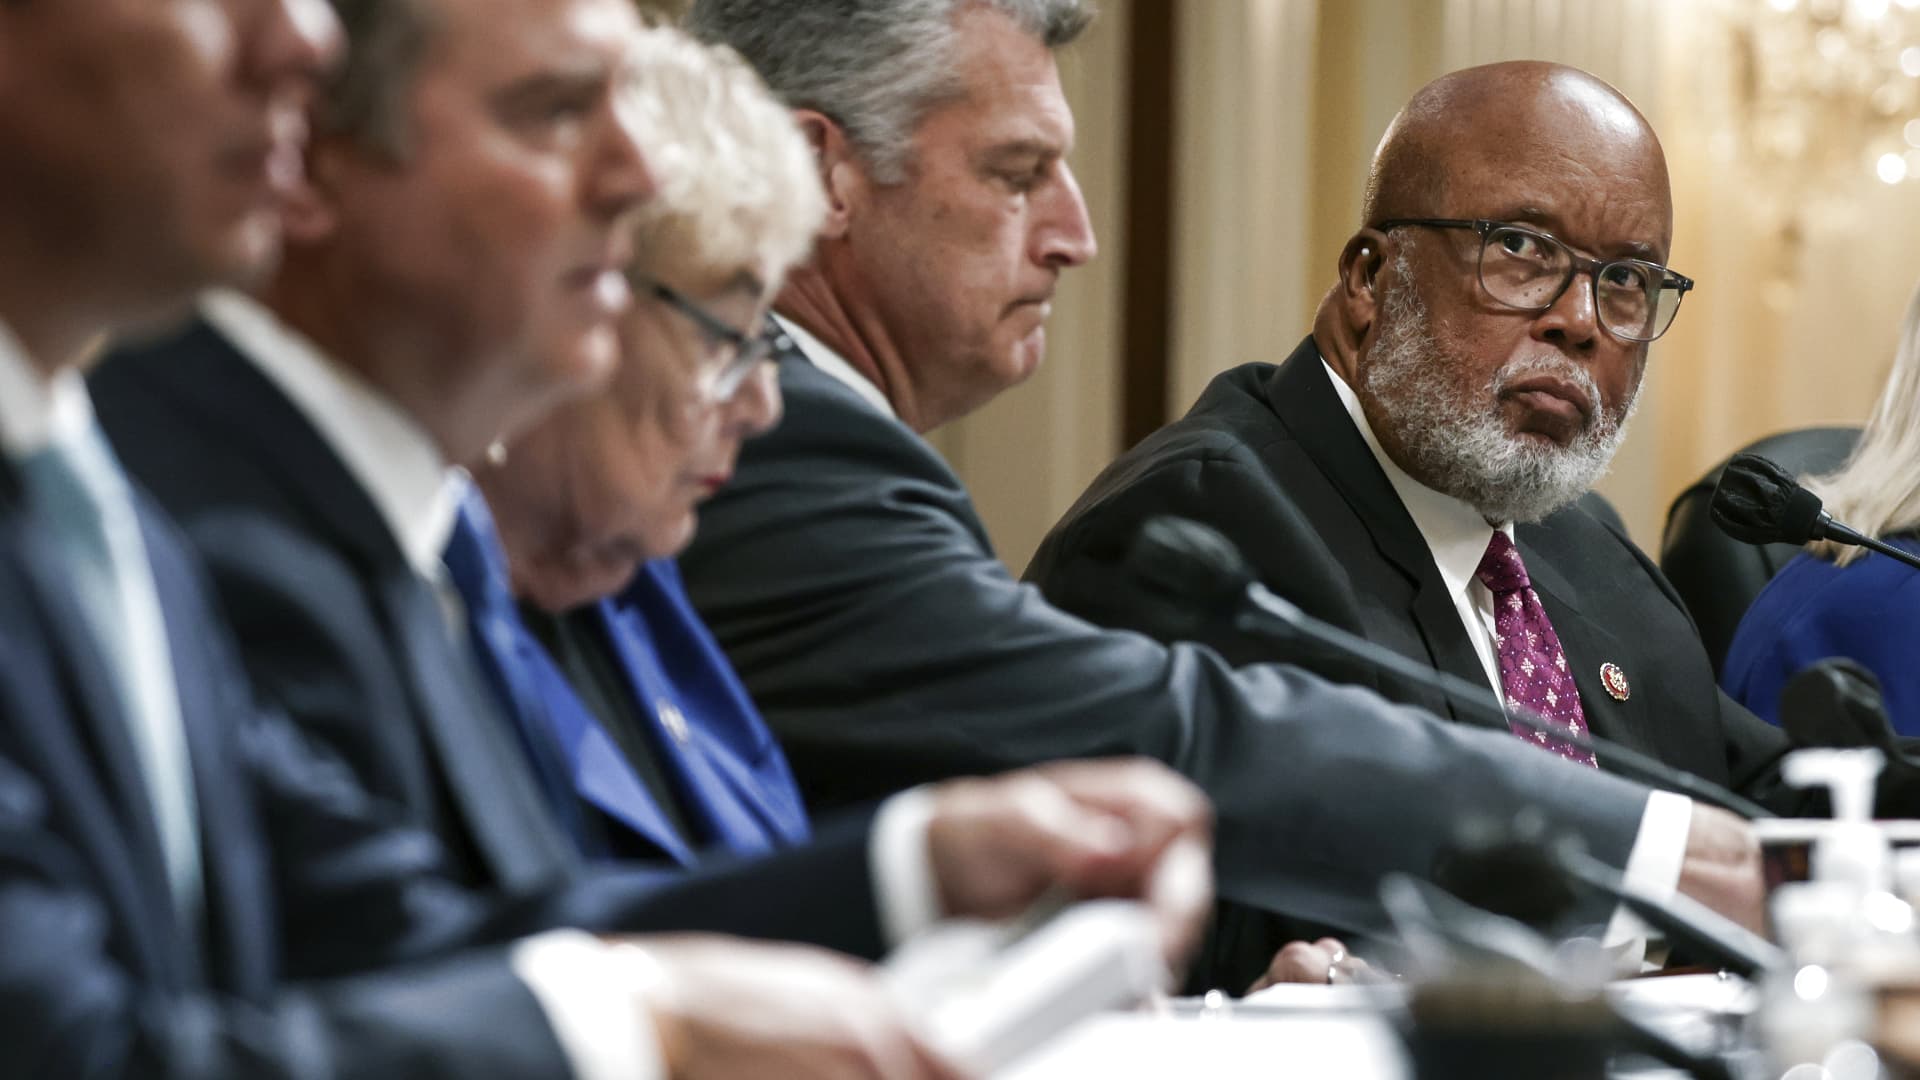 U.S. Rep. Bennie Thompson (D-MS) (R), Chair of the House Select Committee to Investigate the January 6th Attack on the U.S. Capitol, presides over a hearing on the January 6th investigation in the Cannon House Office Building on October 13, 2022 in Washington, DC.